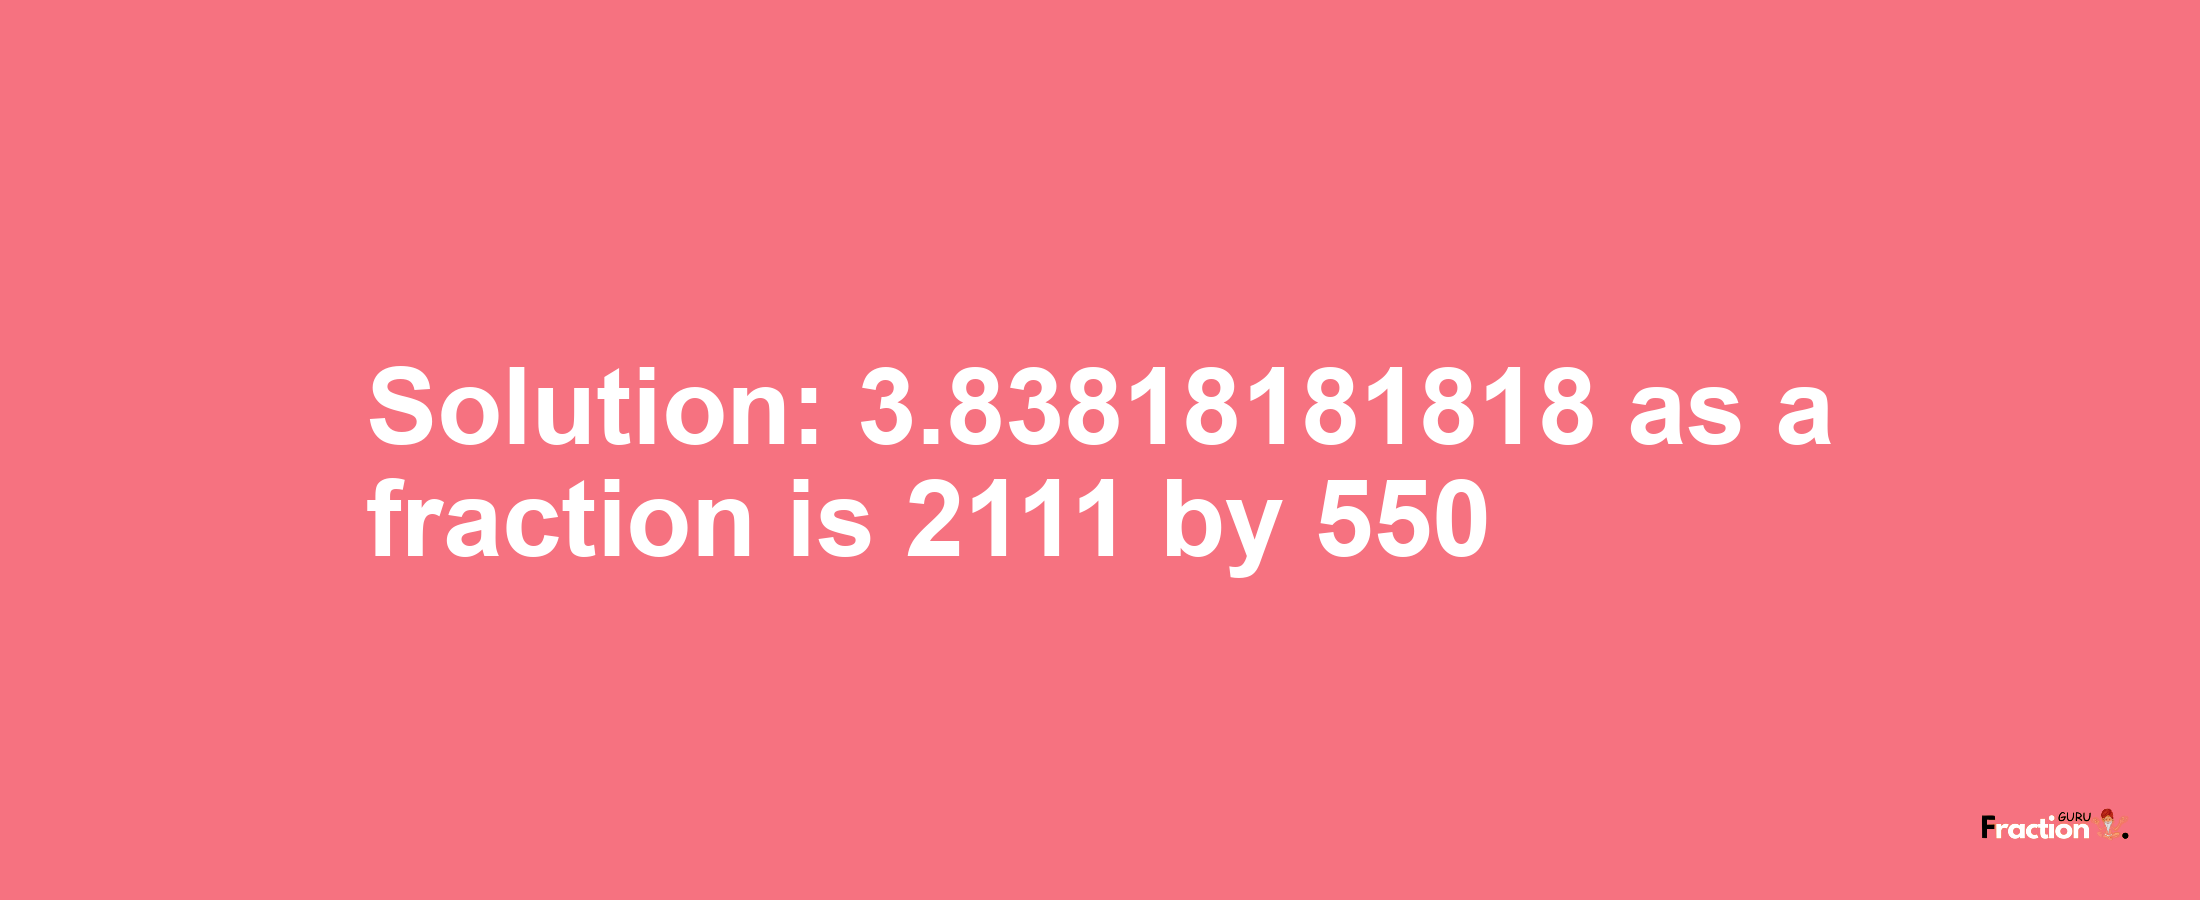 Solution:3.83818181818 as a fraction is 2111/550